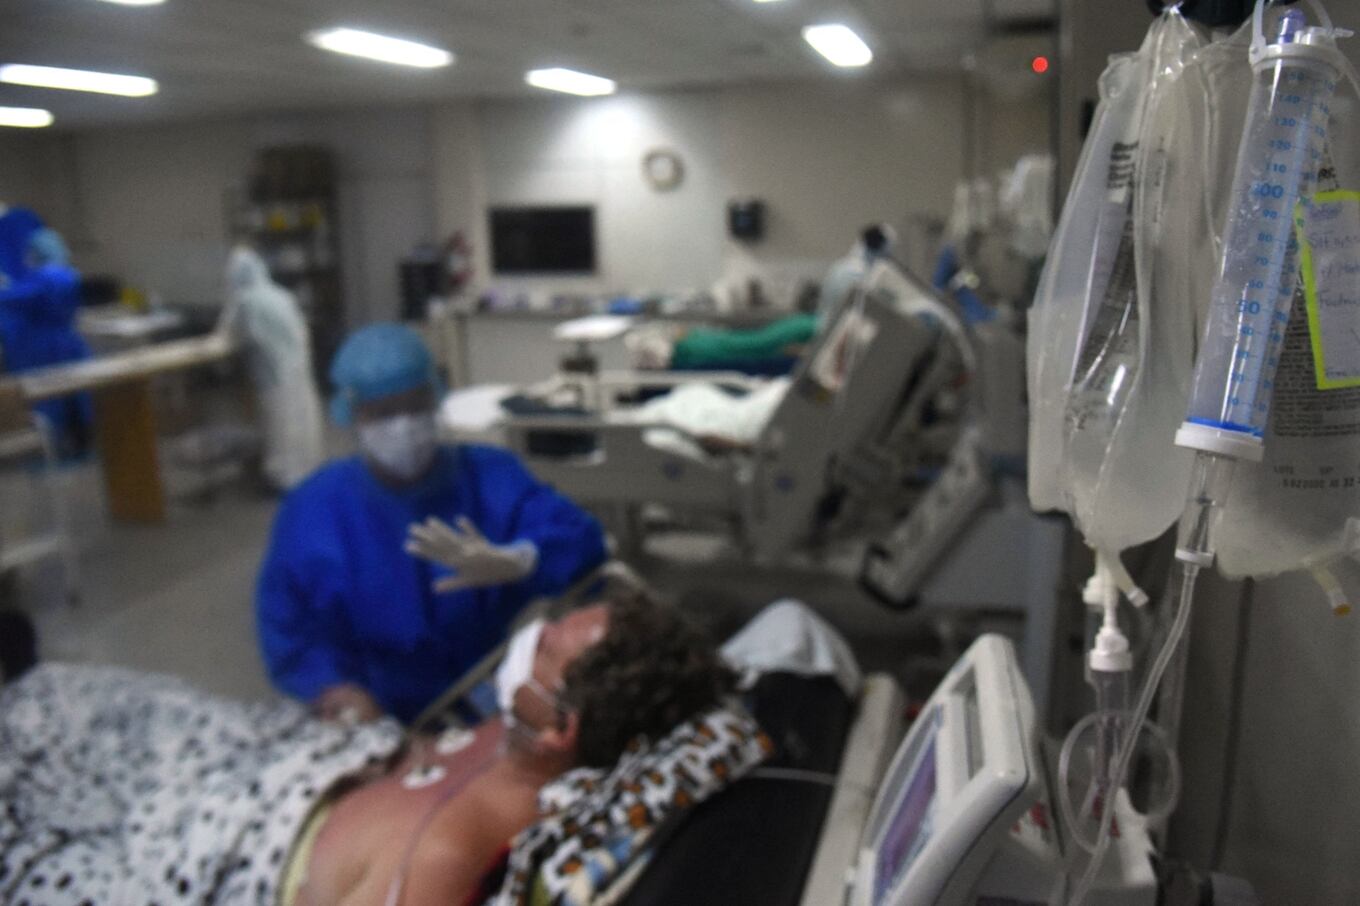 View of the intensive care unit of the Clinics Hospital with COVID-19 patients in San Lorenzo, Paraguay, on March 16, 2021. - Paraguay's government reinforced restrictions due to an increase in the number of cases of COVID-19, which has collapsed the healthcare system. (Photo by DANIEL DUARTE / AFP)